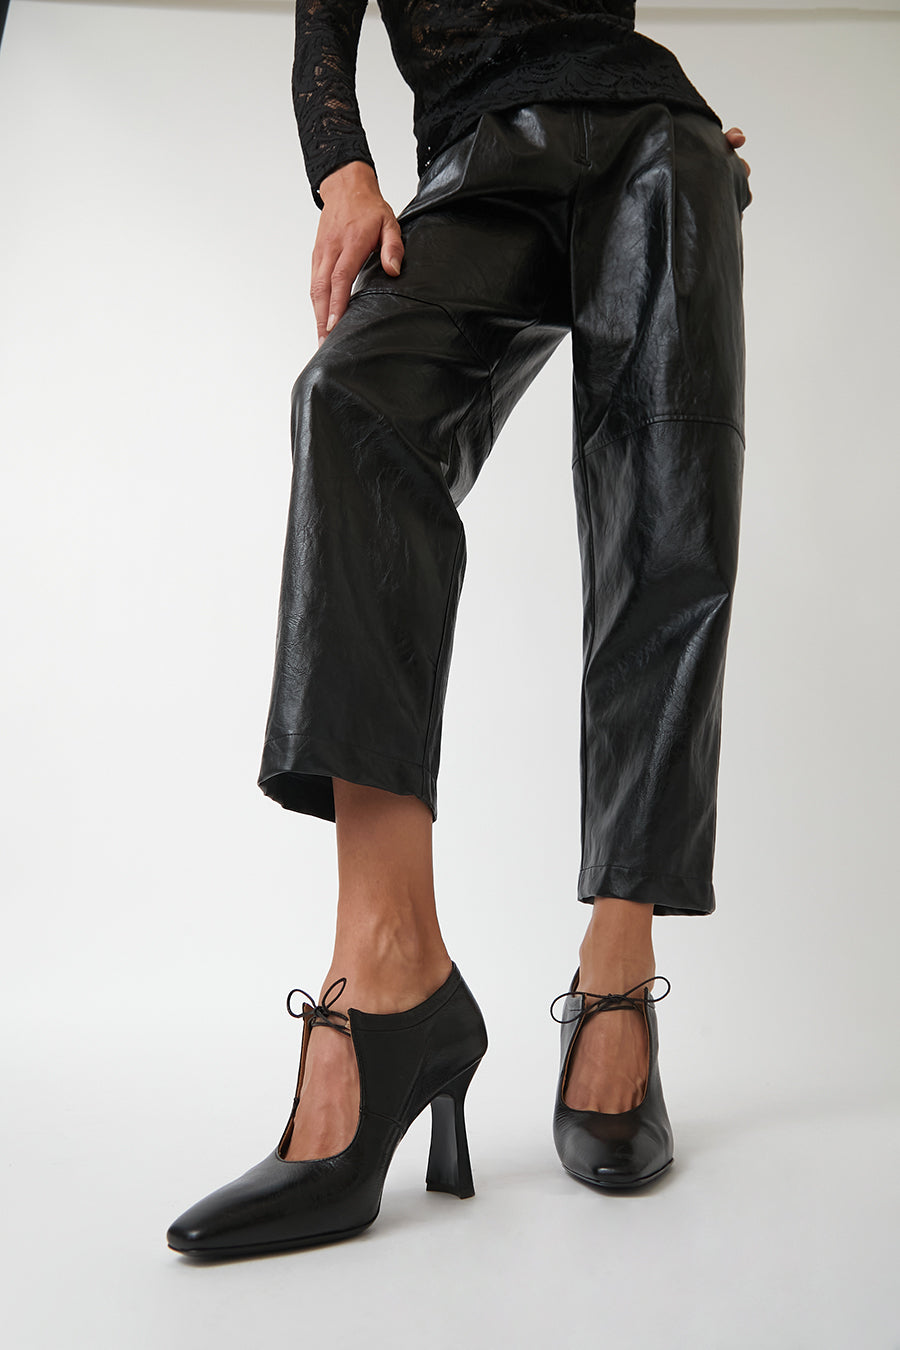 Barely There Lace Up Heel - Noir